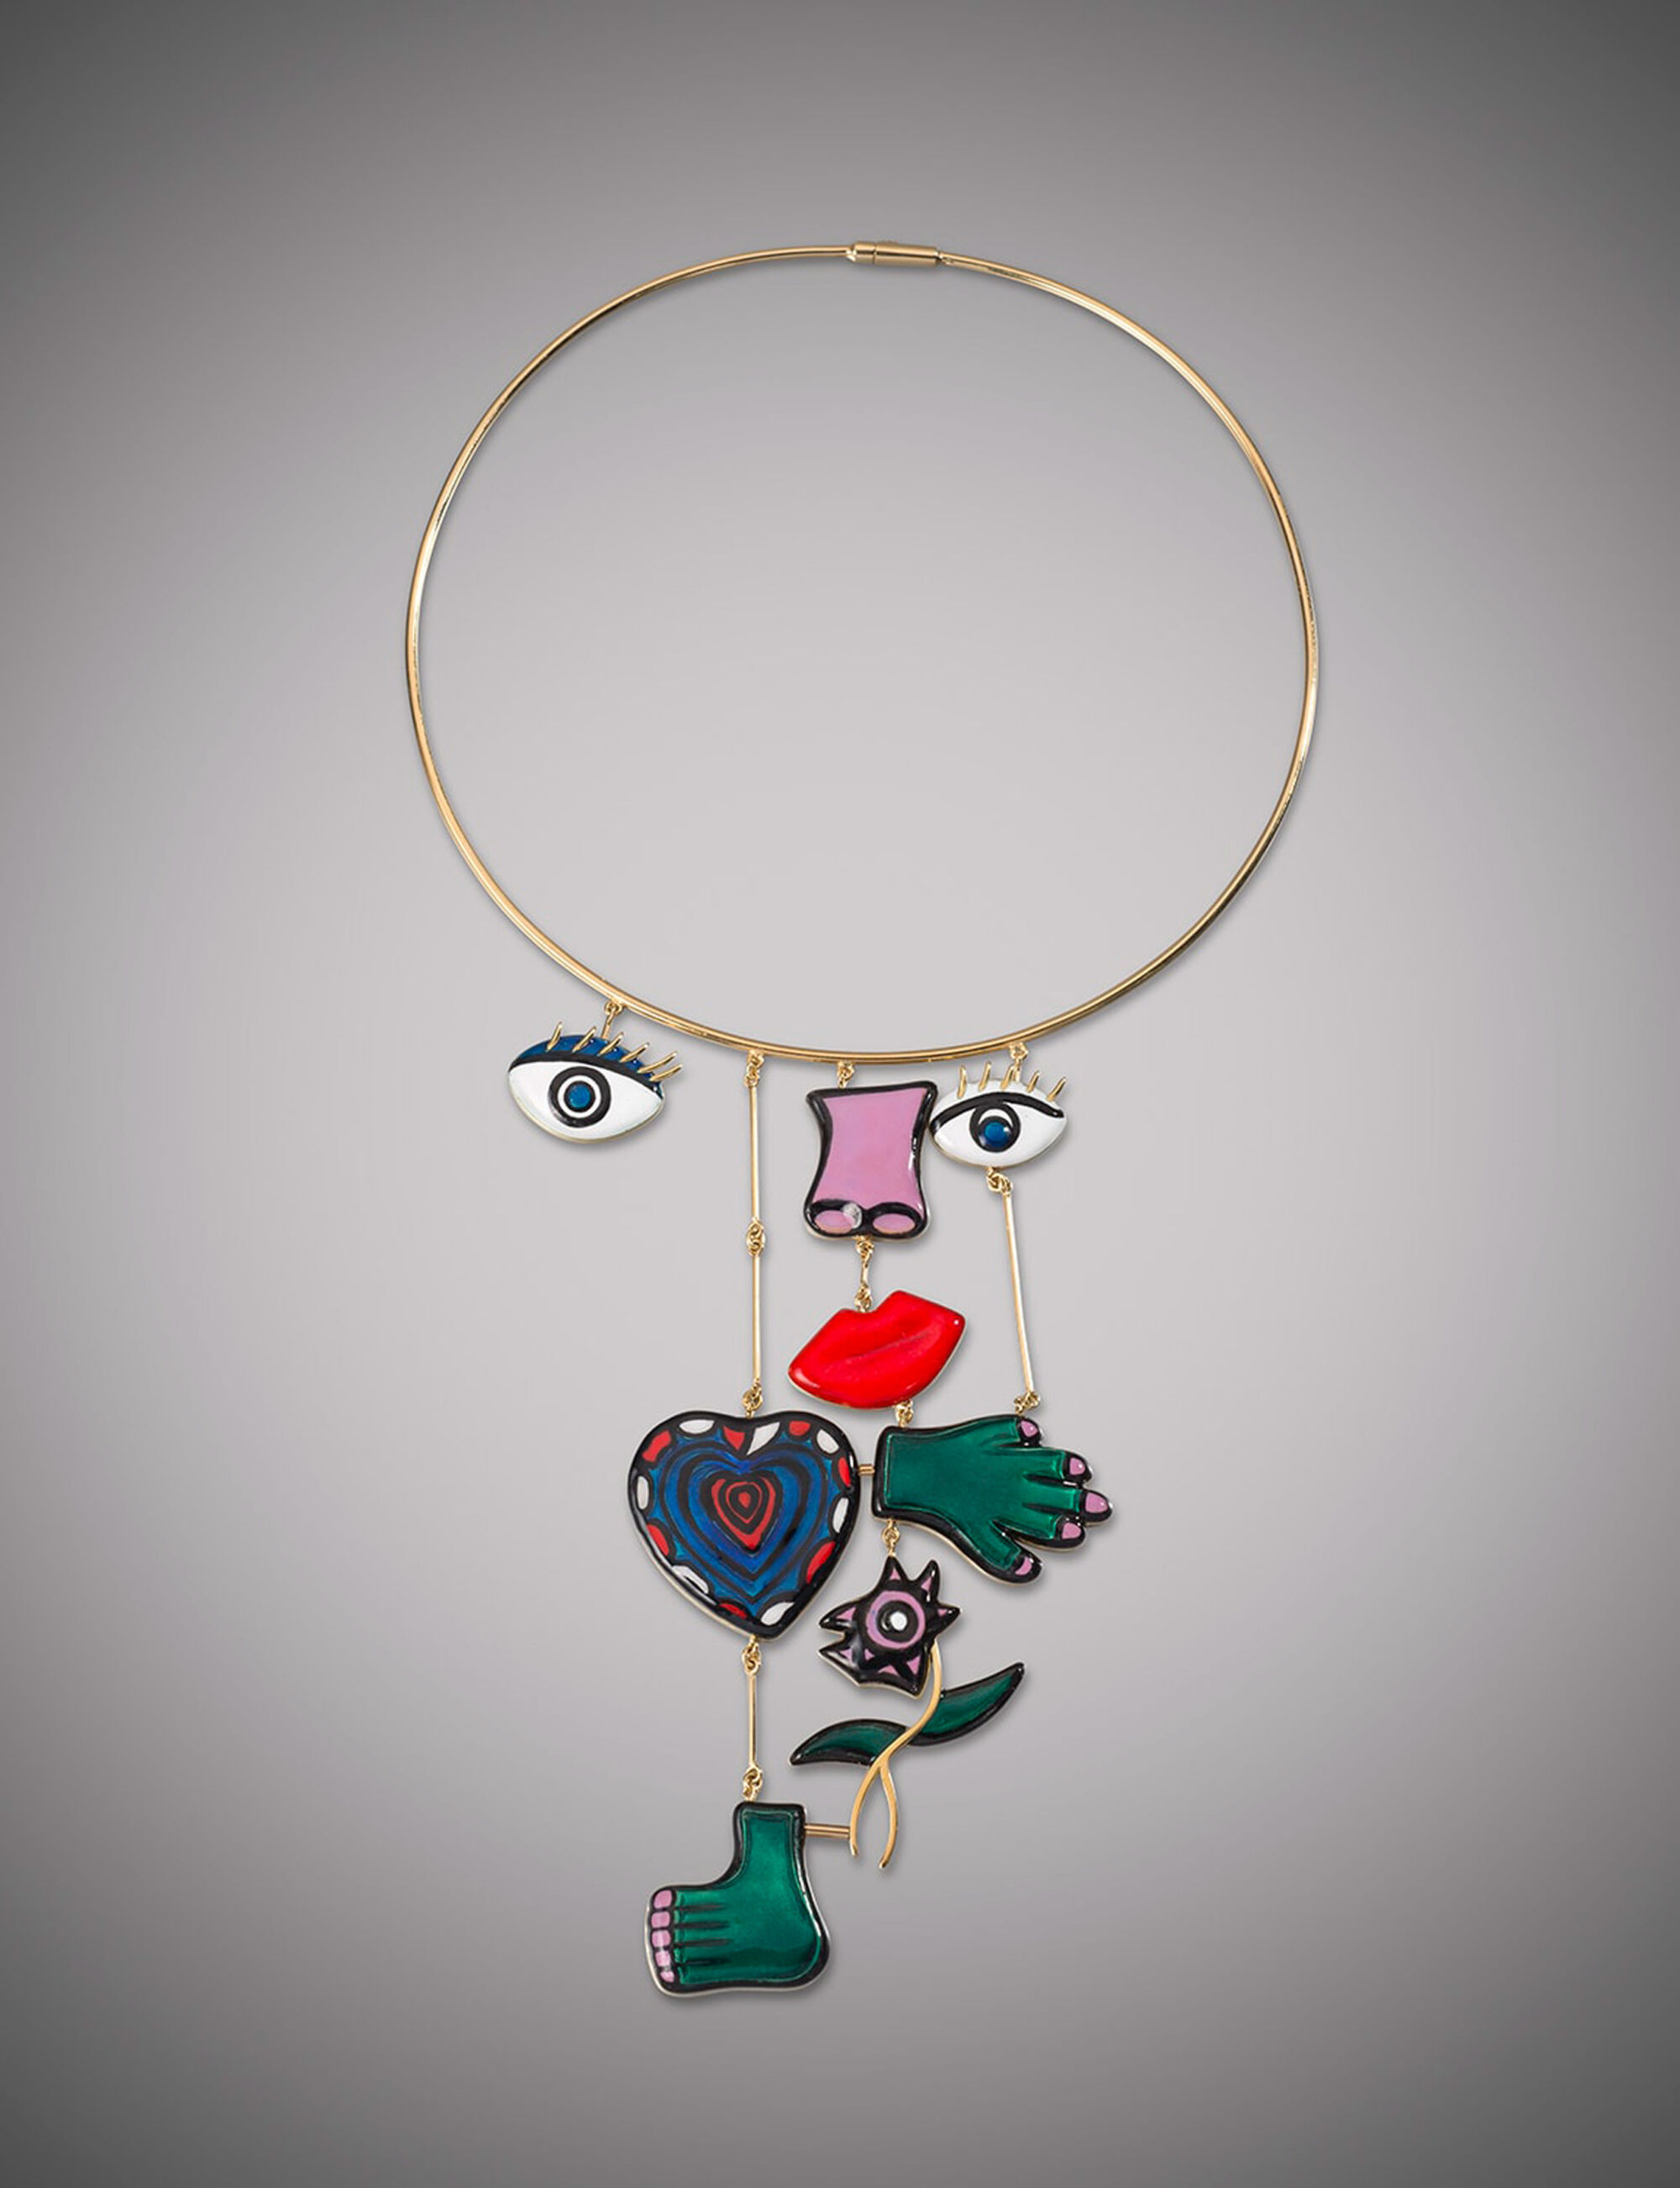 The Wick - Jewellery Niki de Saint Phalle, Assemblage Necklace 1974/2015, Louisa Guinness Gallery